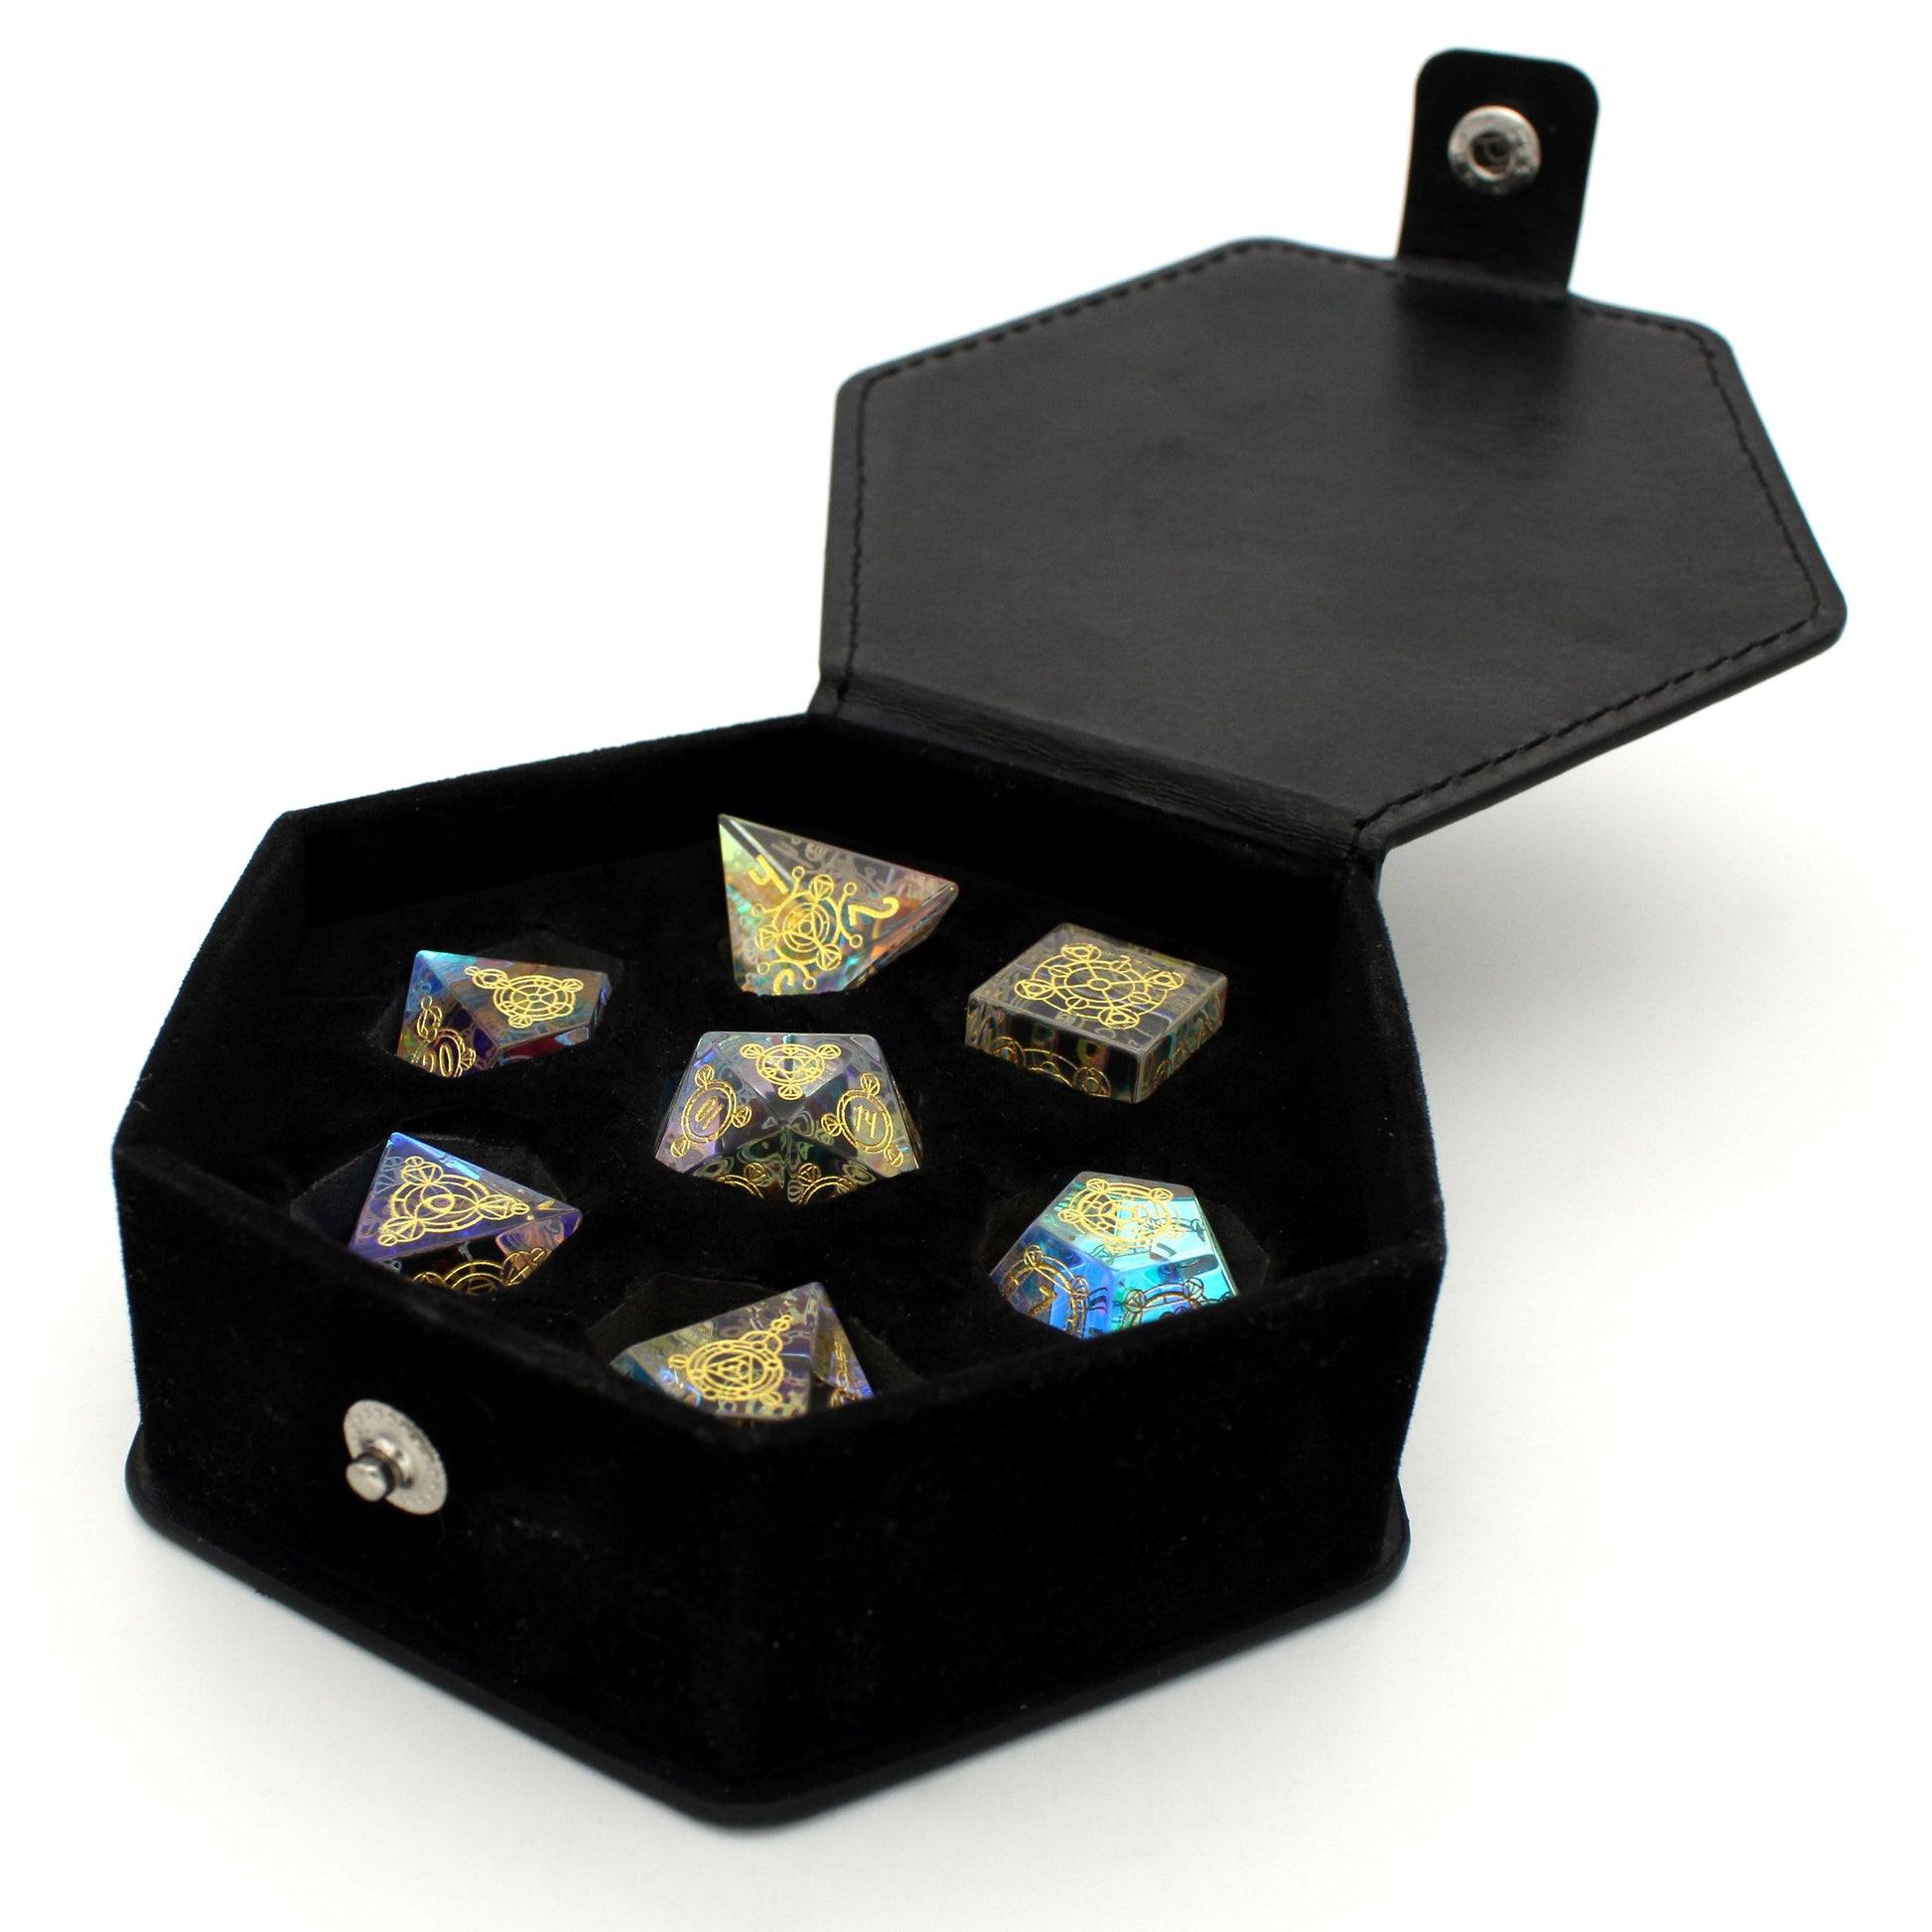 Bifrosting is a 7-piece rainbow crystal set with gold engraving from our exclusive Sigil Collection.